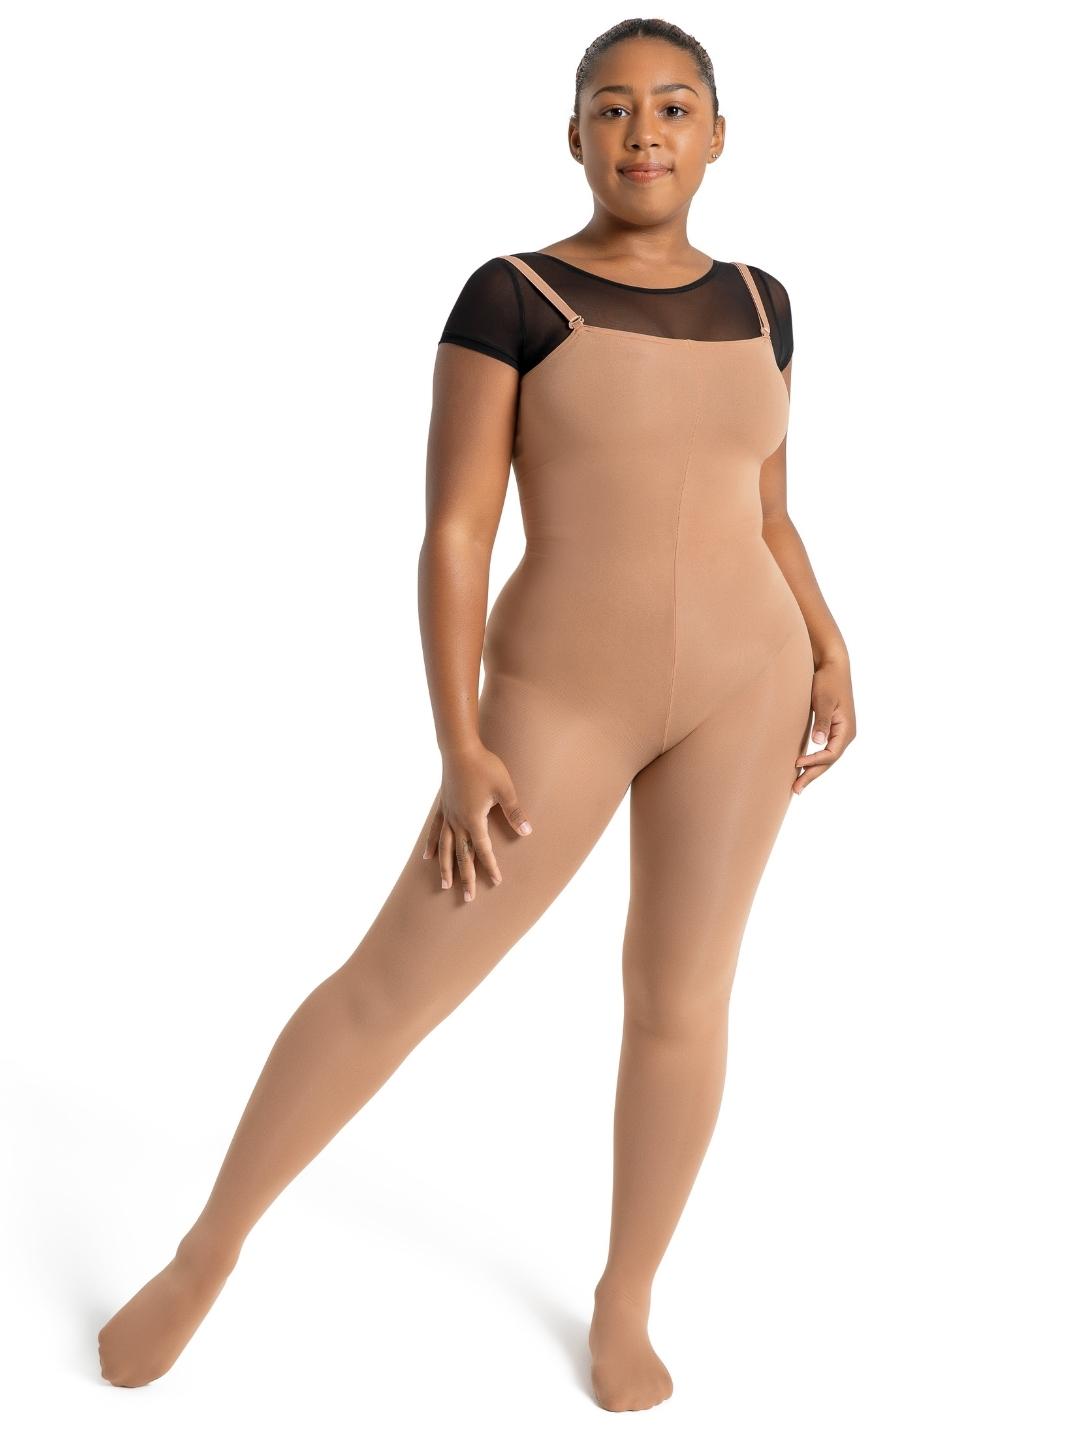 Capezio 1917 Chid and Adult Footless Tights